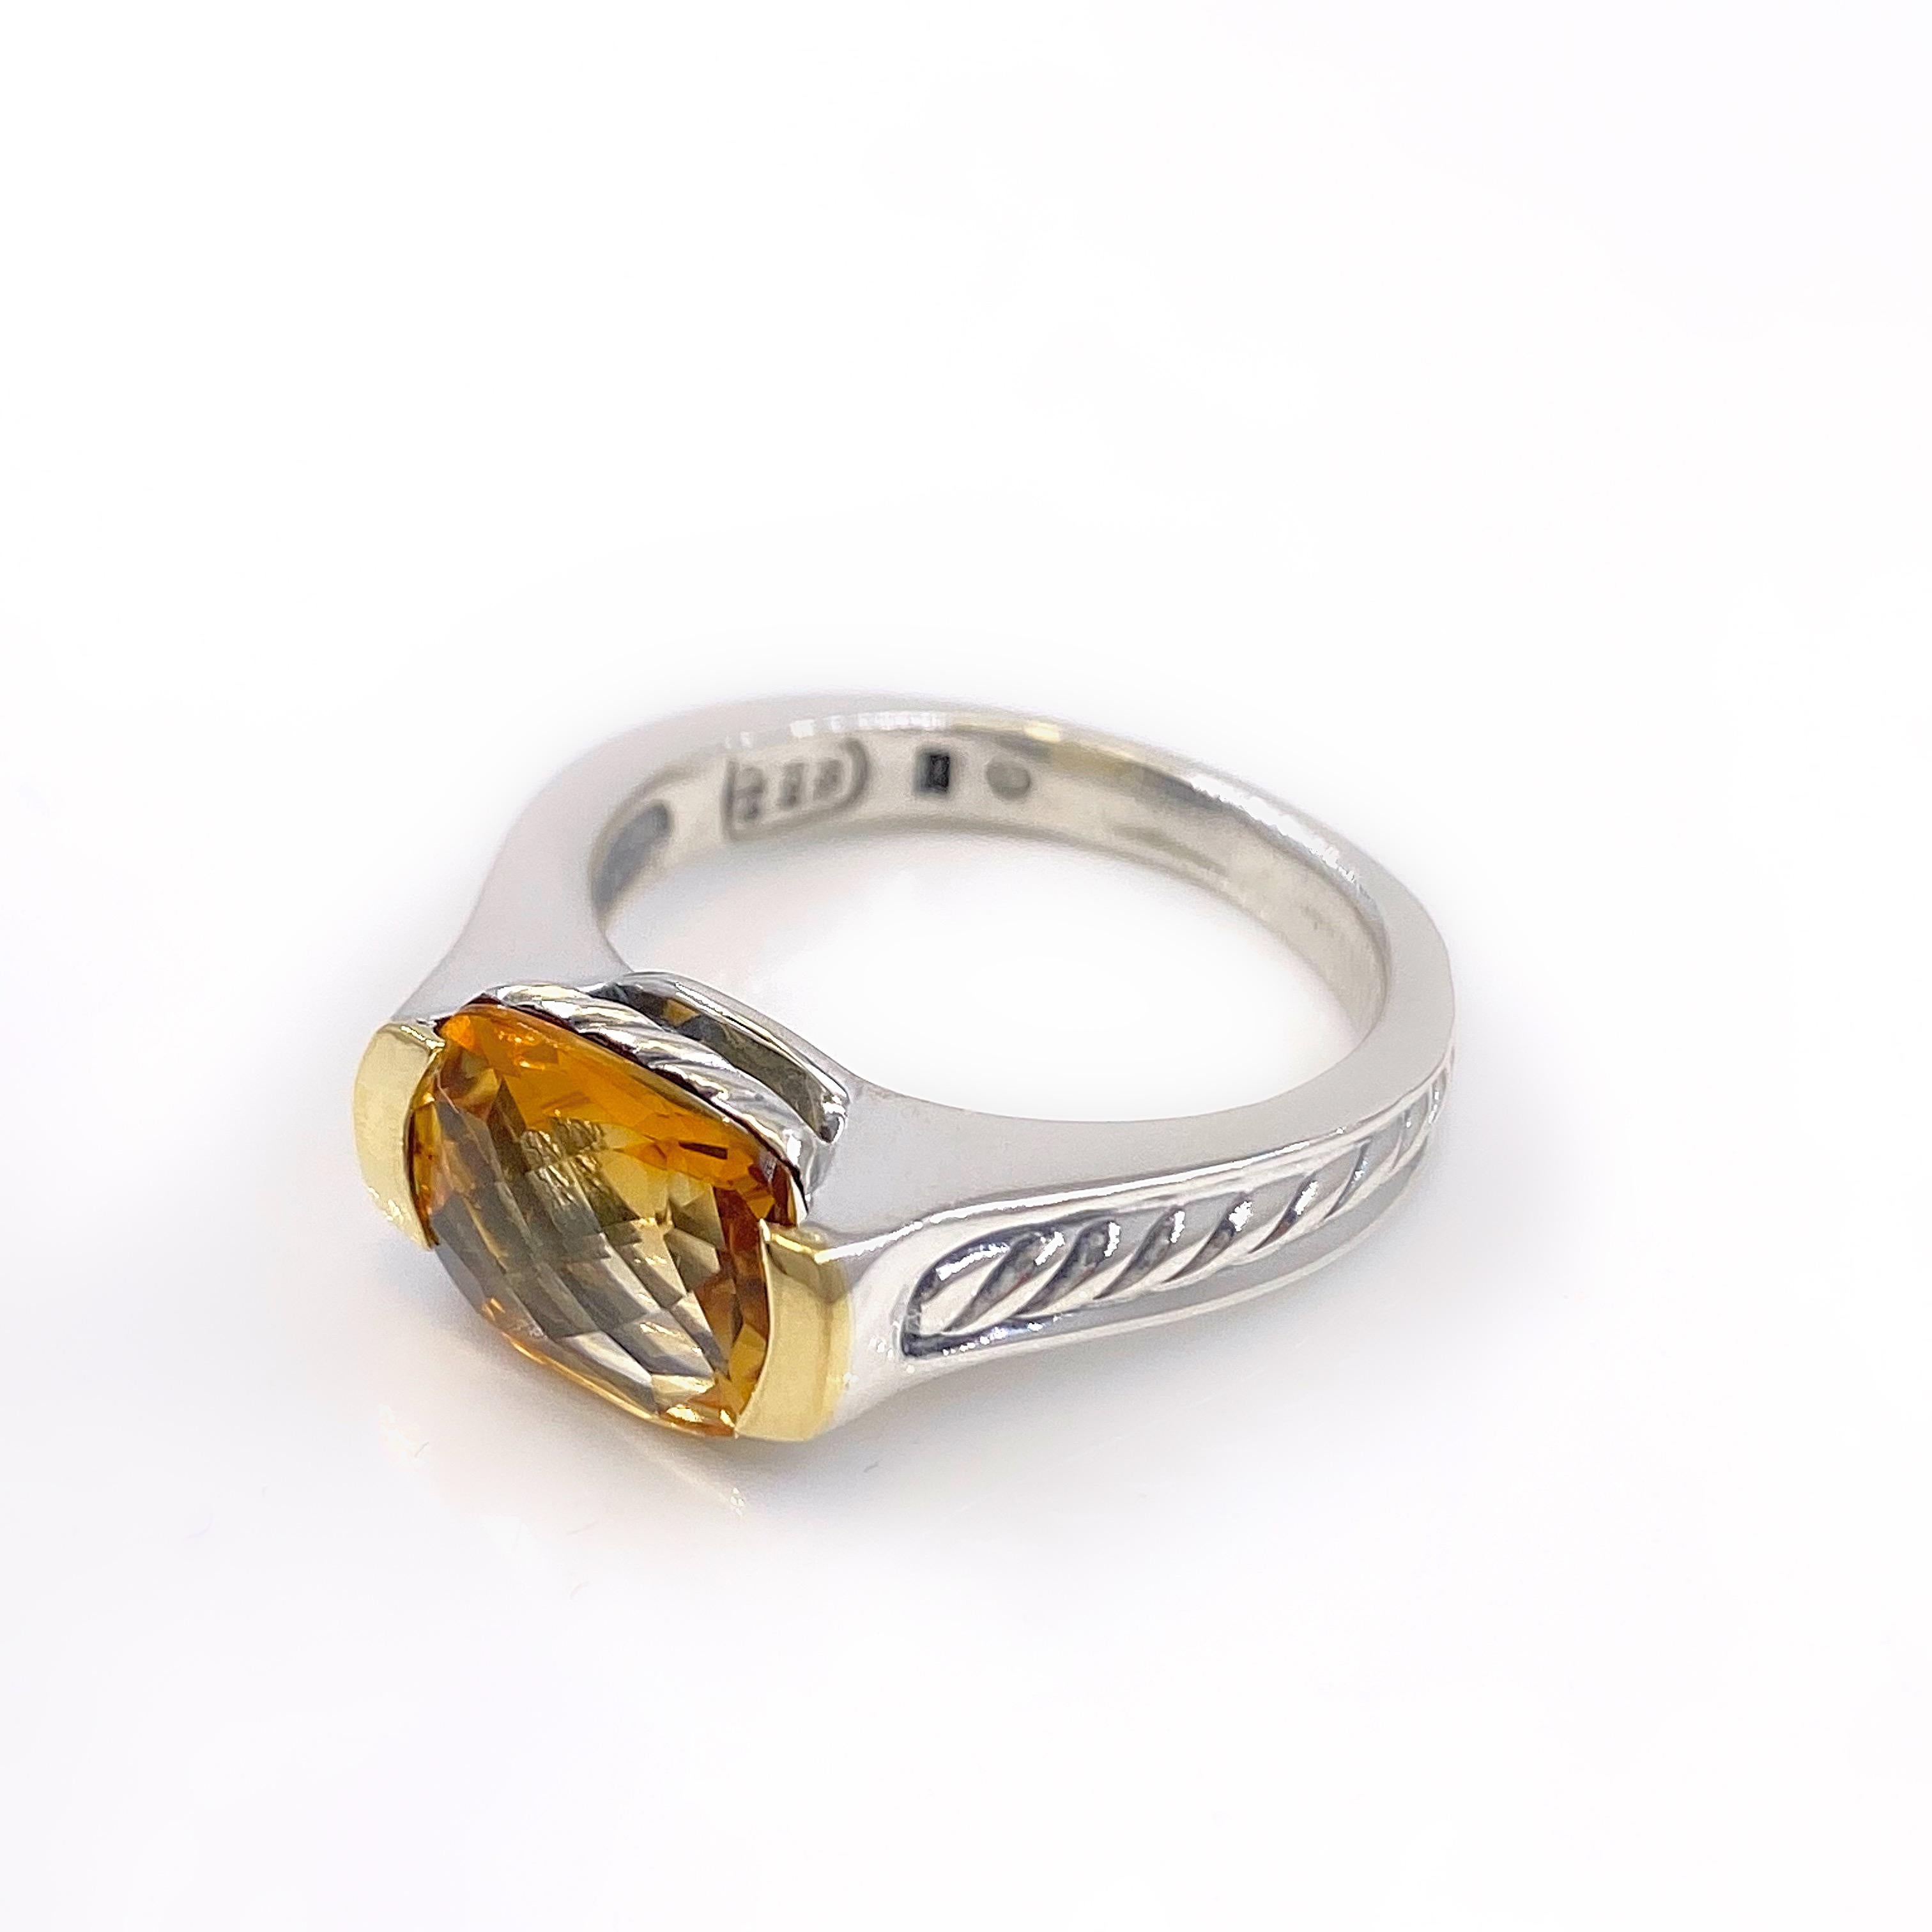 David Yurman Faceted Citrine Ring 18 Karat Yellow Gold and Sterling Silver 2